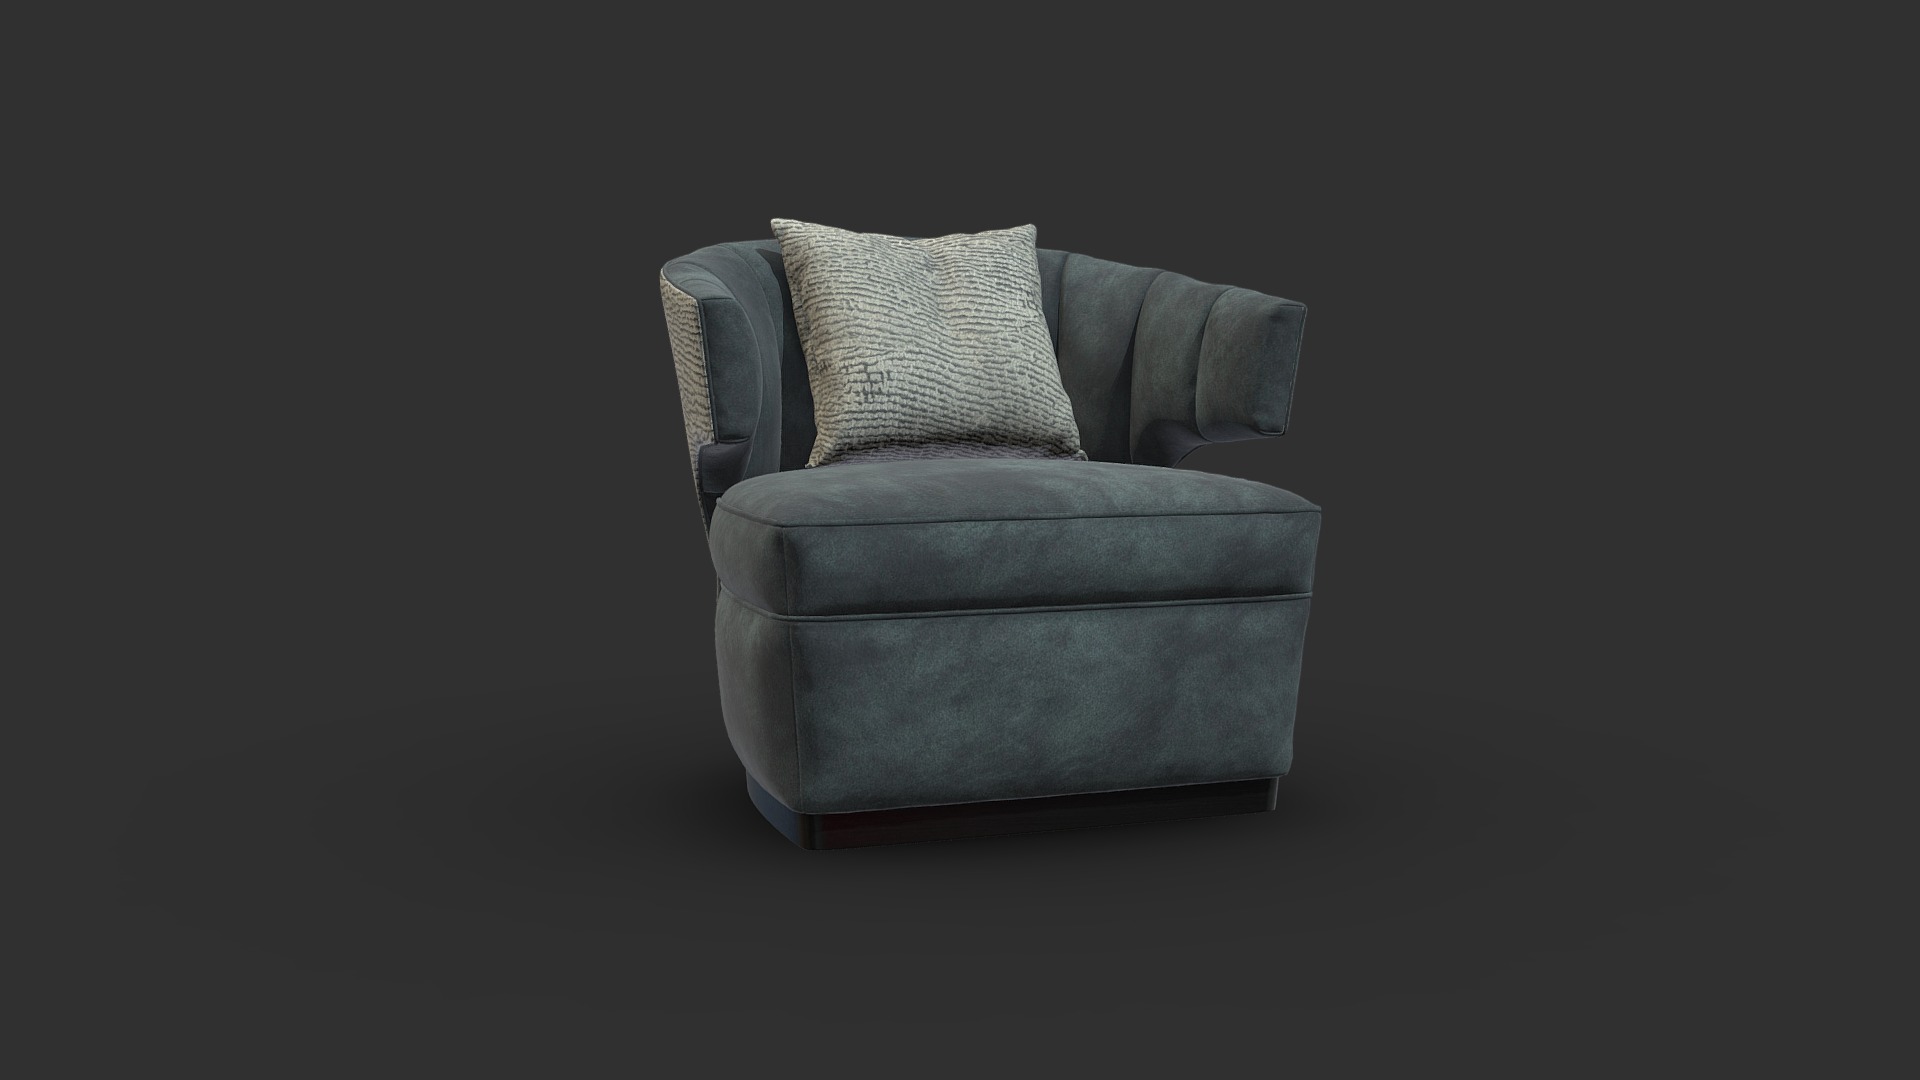 3D model Gibbs Occasional Armchair - This is a 3D model of the Gibbs Occasional Armchair. The 3D model is about a grey couch with a grey cushion.